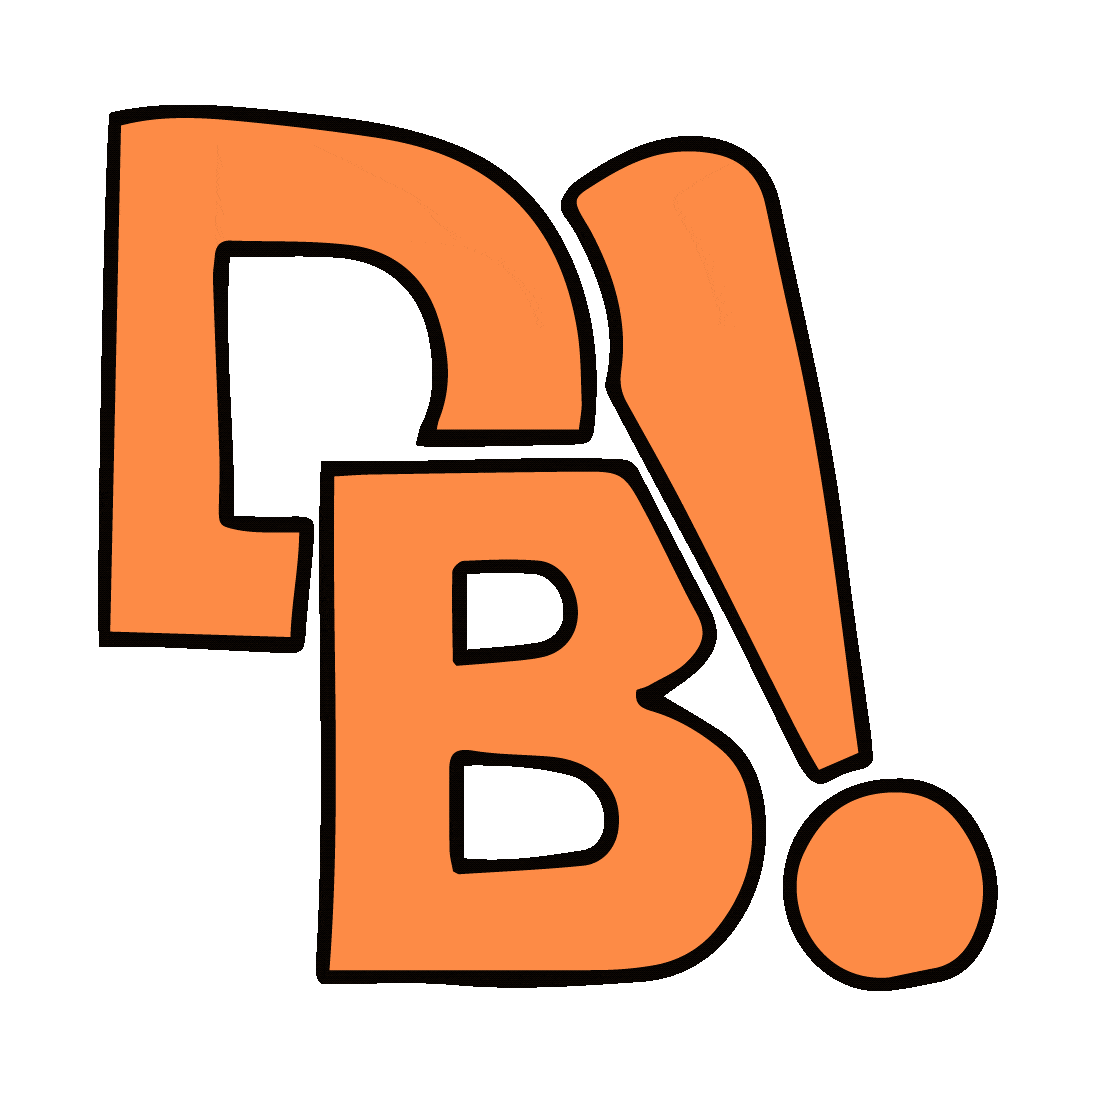 A logo with the letters DB with two bite marks taken out of it